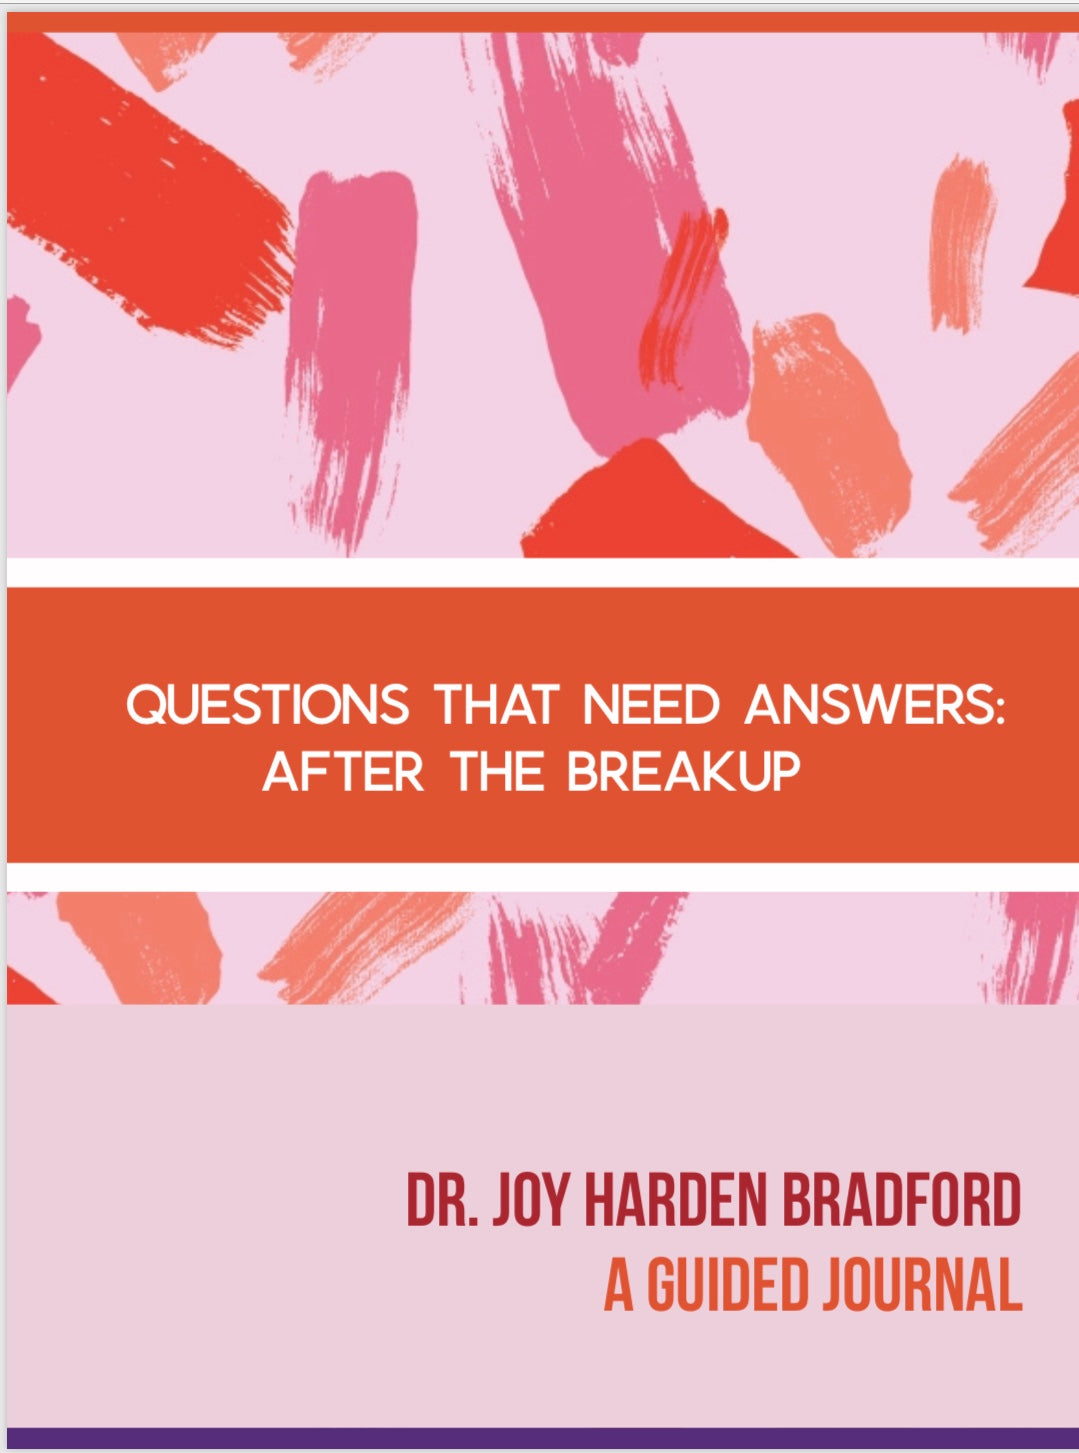 Questions That Need Answers: After the Breakup (Digital Copy)